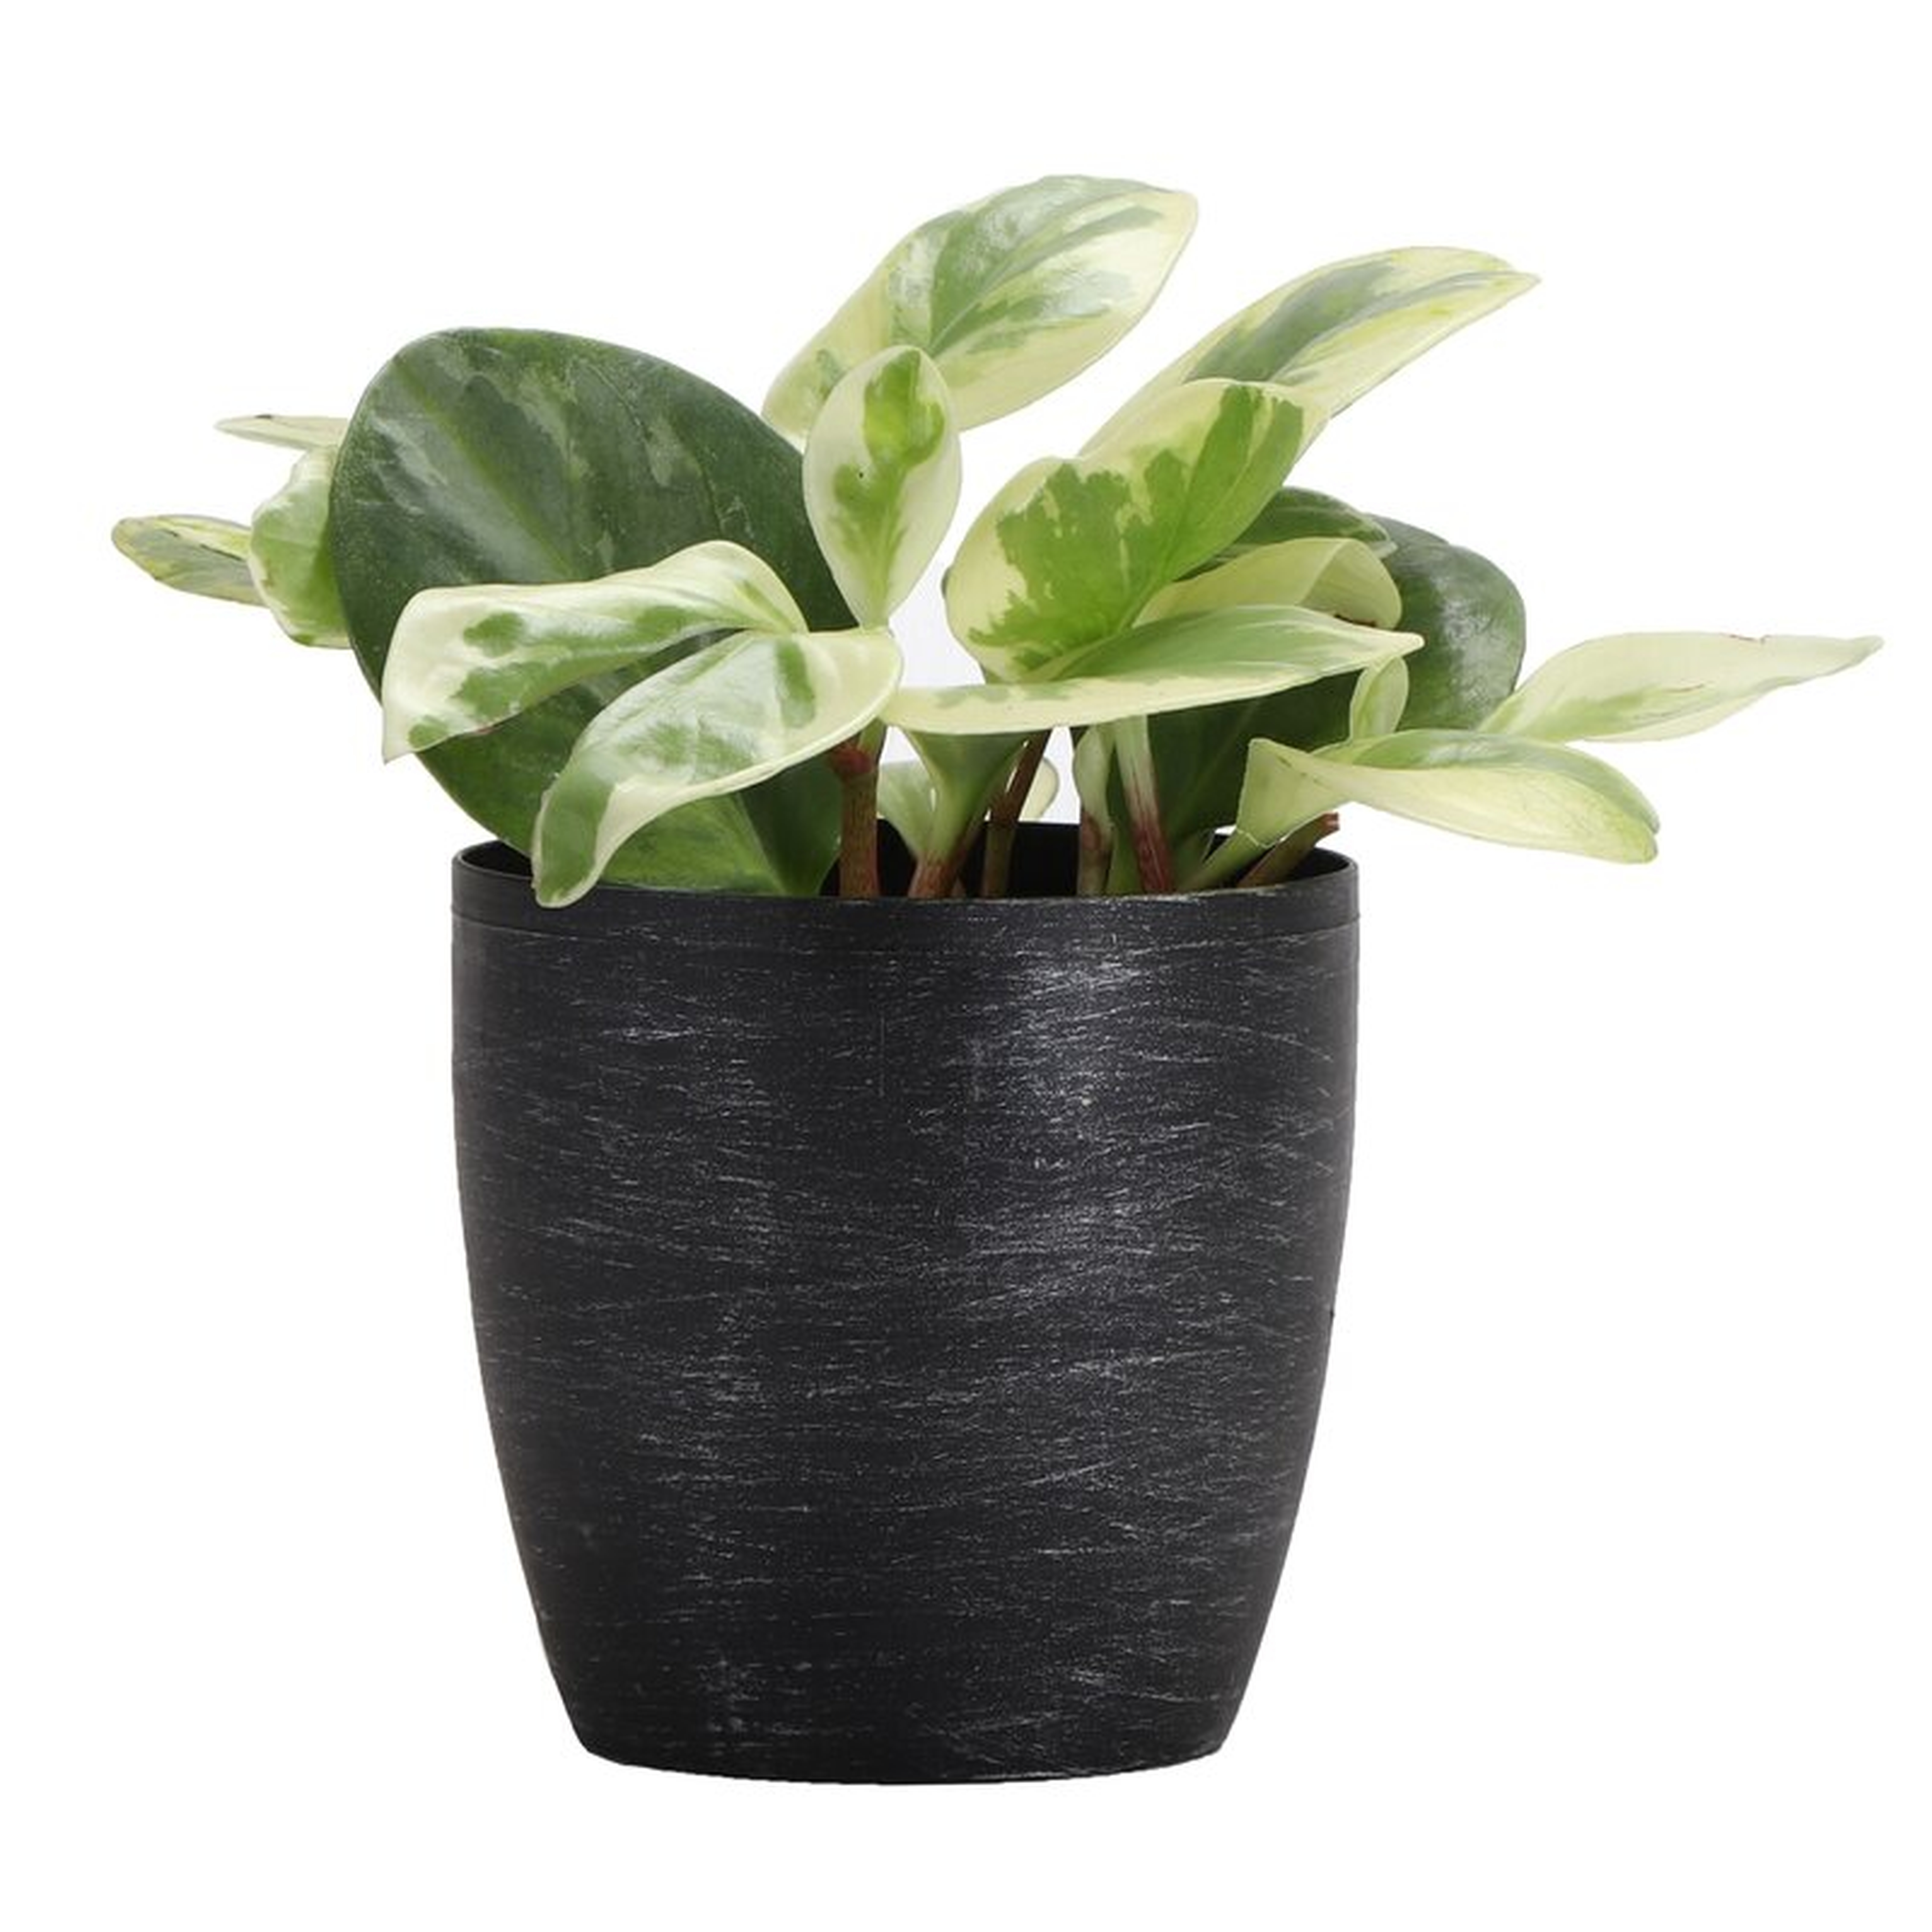 Thorsen's Greenhouse 4" Live Foliage Plant in Pot Base Color: Brushed Silver - Perigold